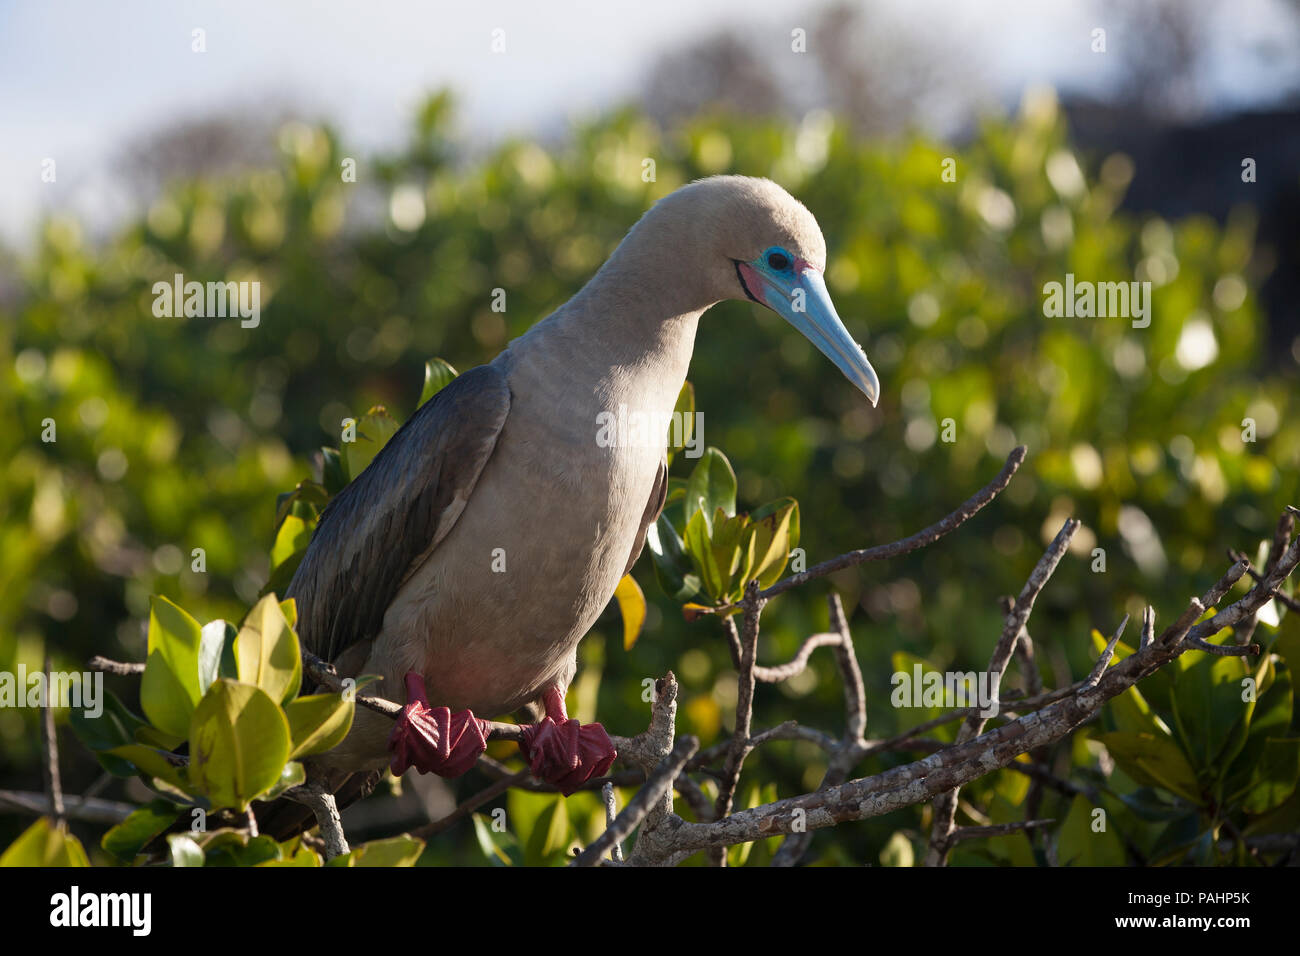 Red-footed Booby (Sula sula), Galapagos Islands Stock Photo